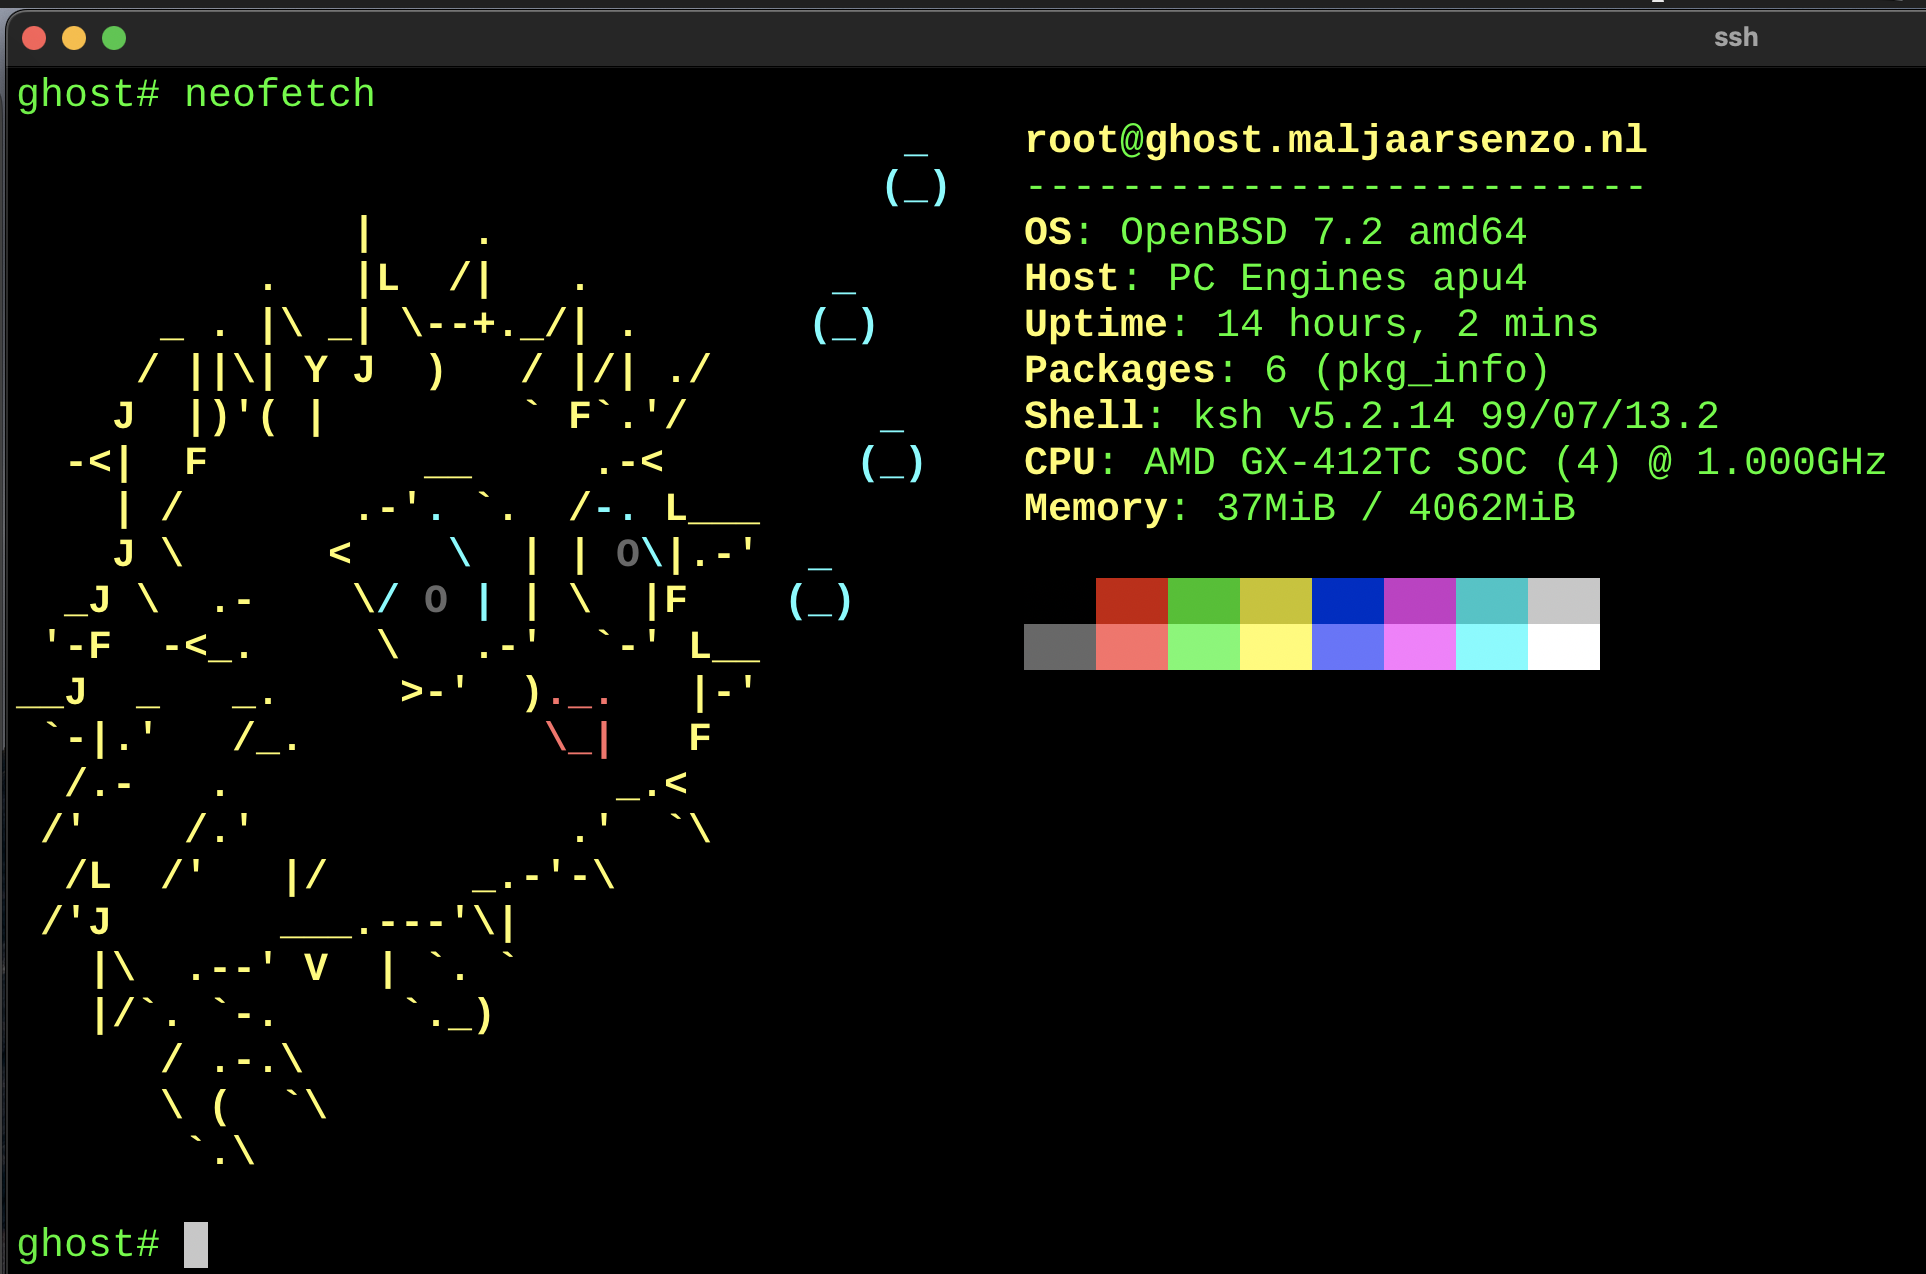 OpenBSD neofetch output from the new APU2 device